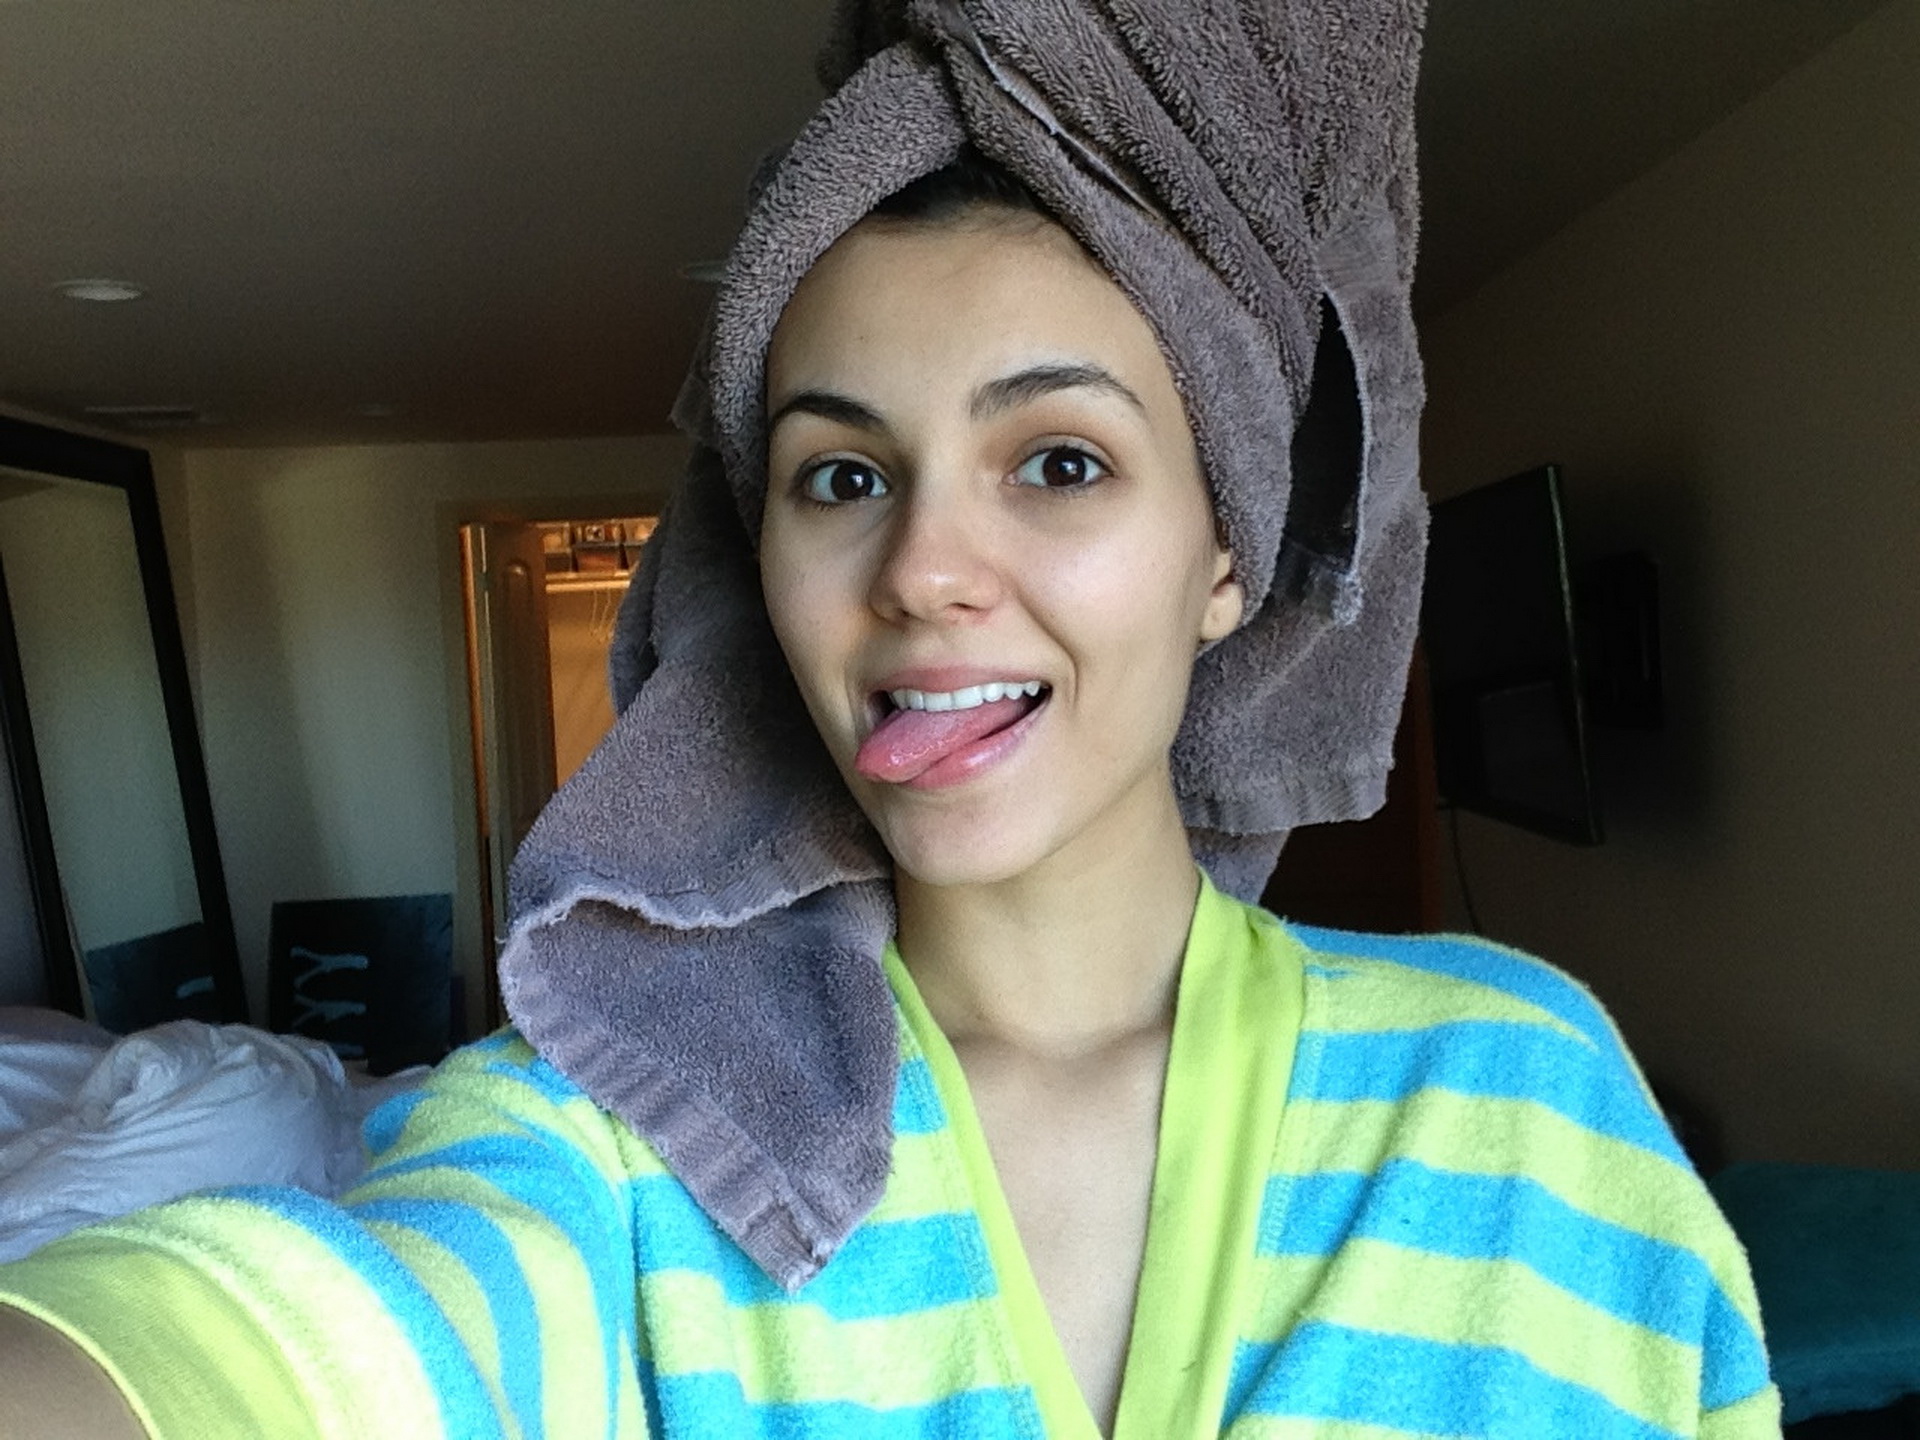 Victoria_Justice_leaked_private_nude_photo_hacked_personal_naked_pics_36x_MixQ_30.jpg